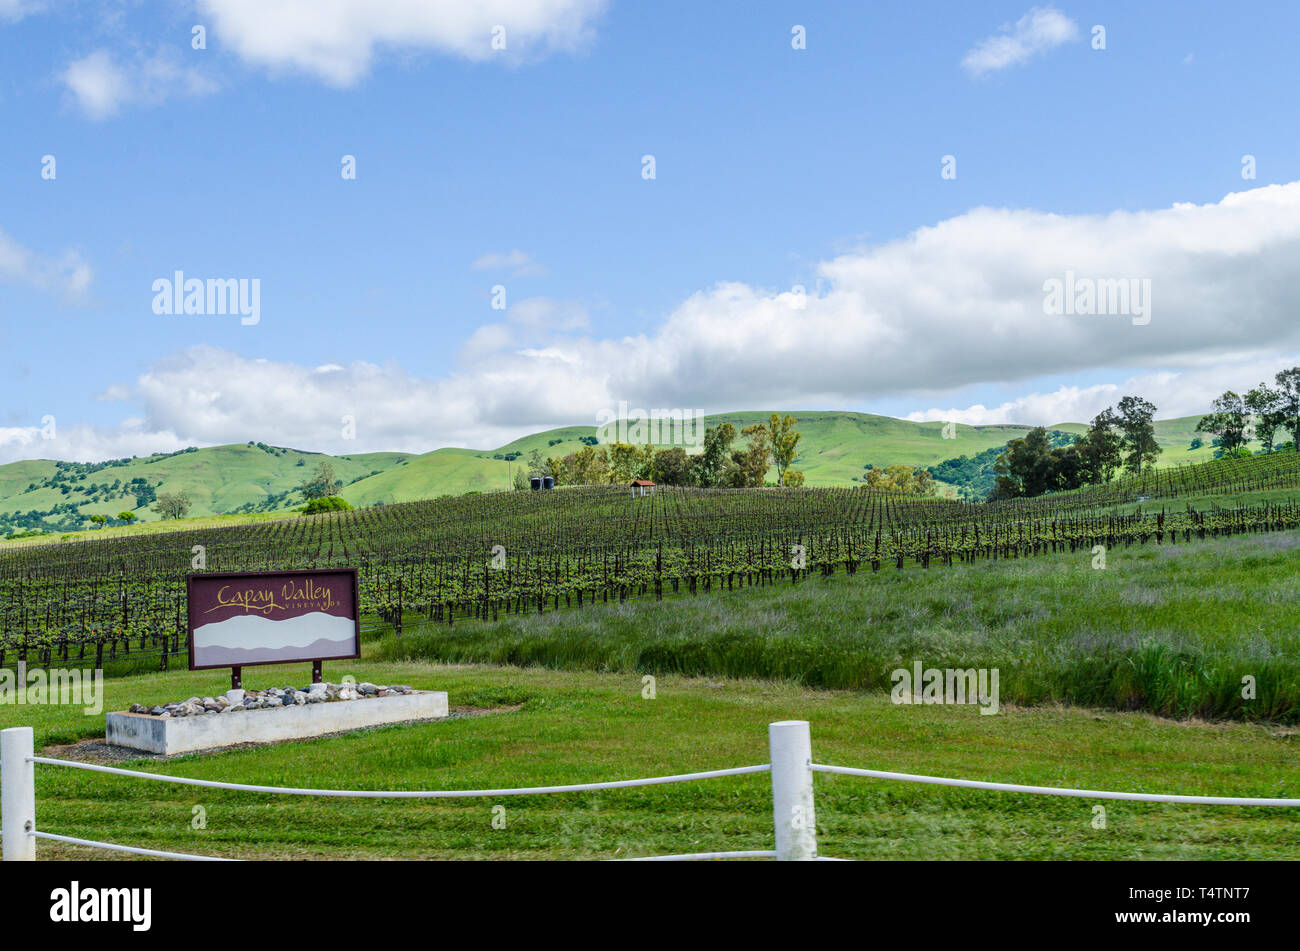 The vines of Capay Valley Vineyards in the Capay Valley of California USA an easy day trip from San Francisco Stock Photo